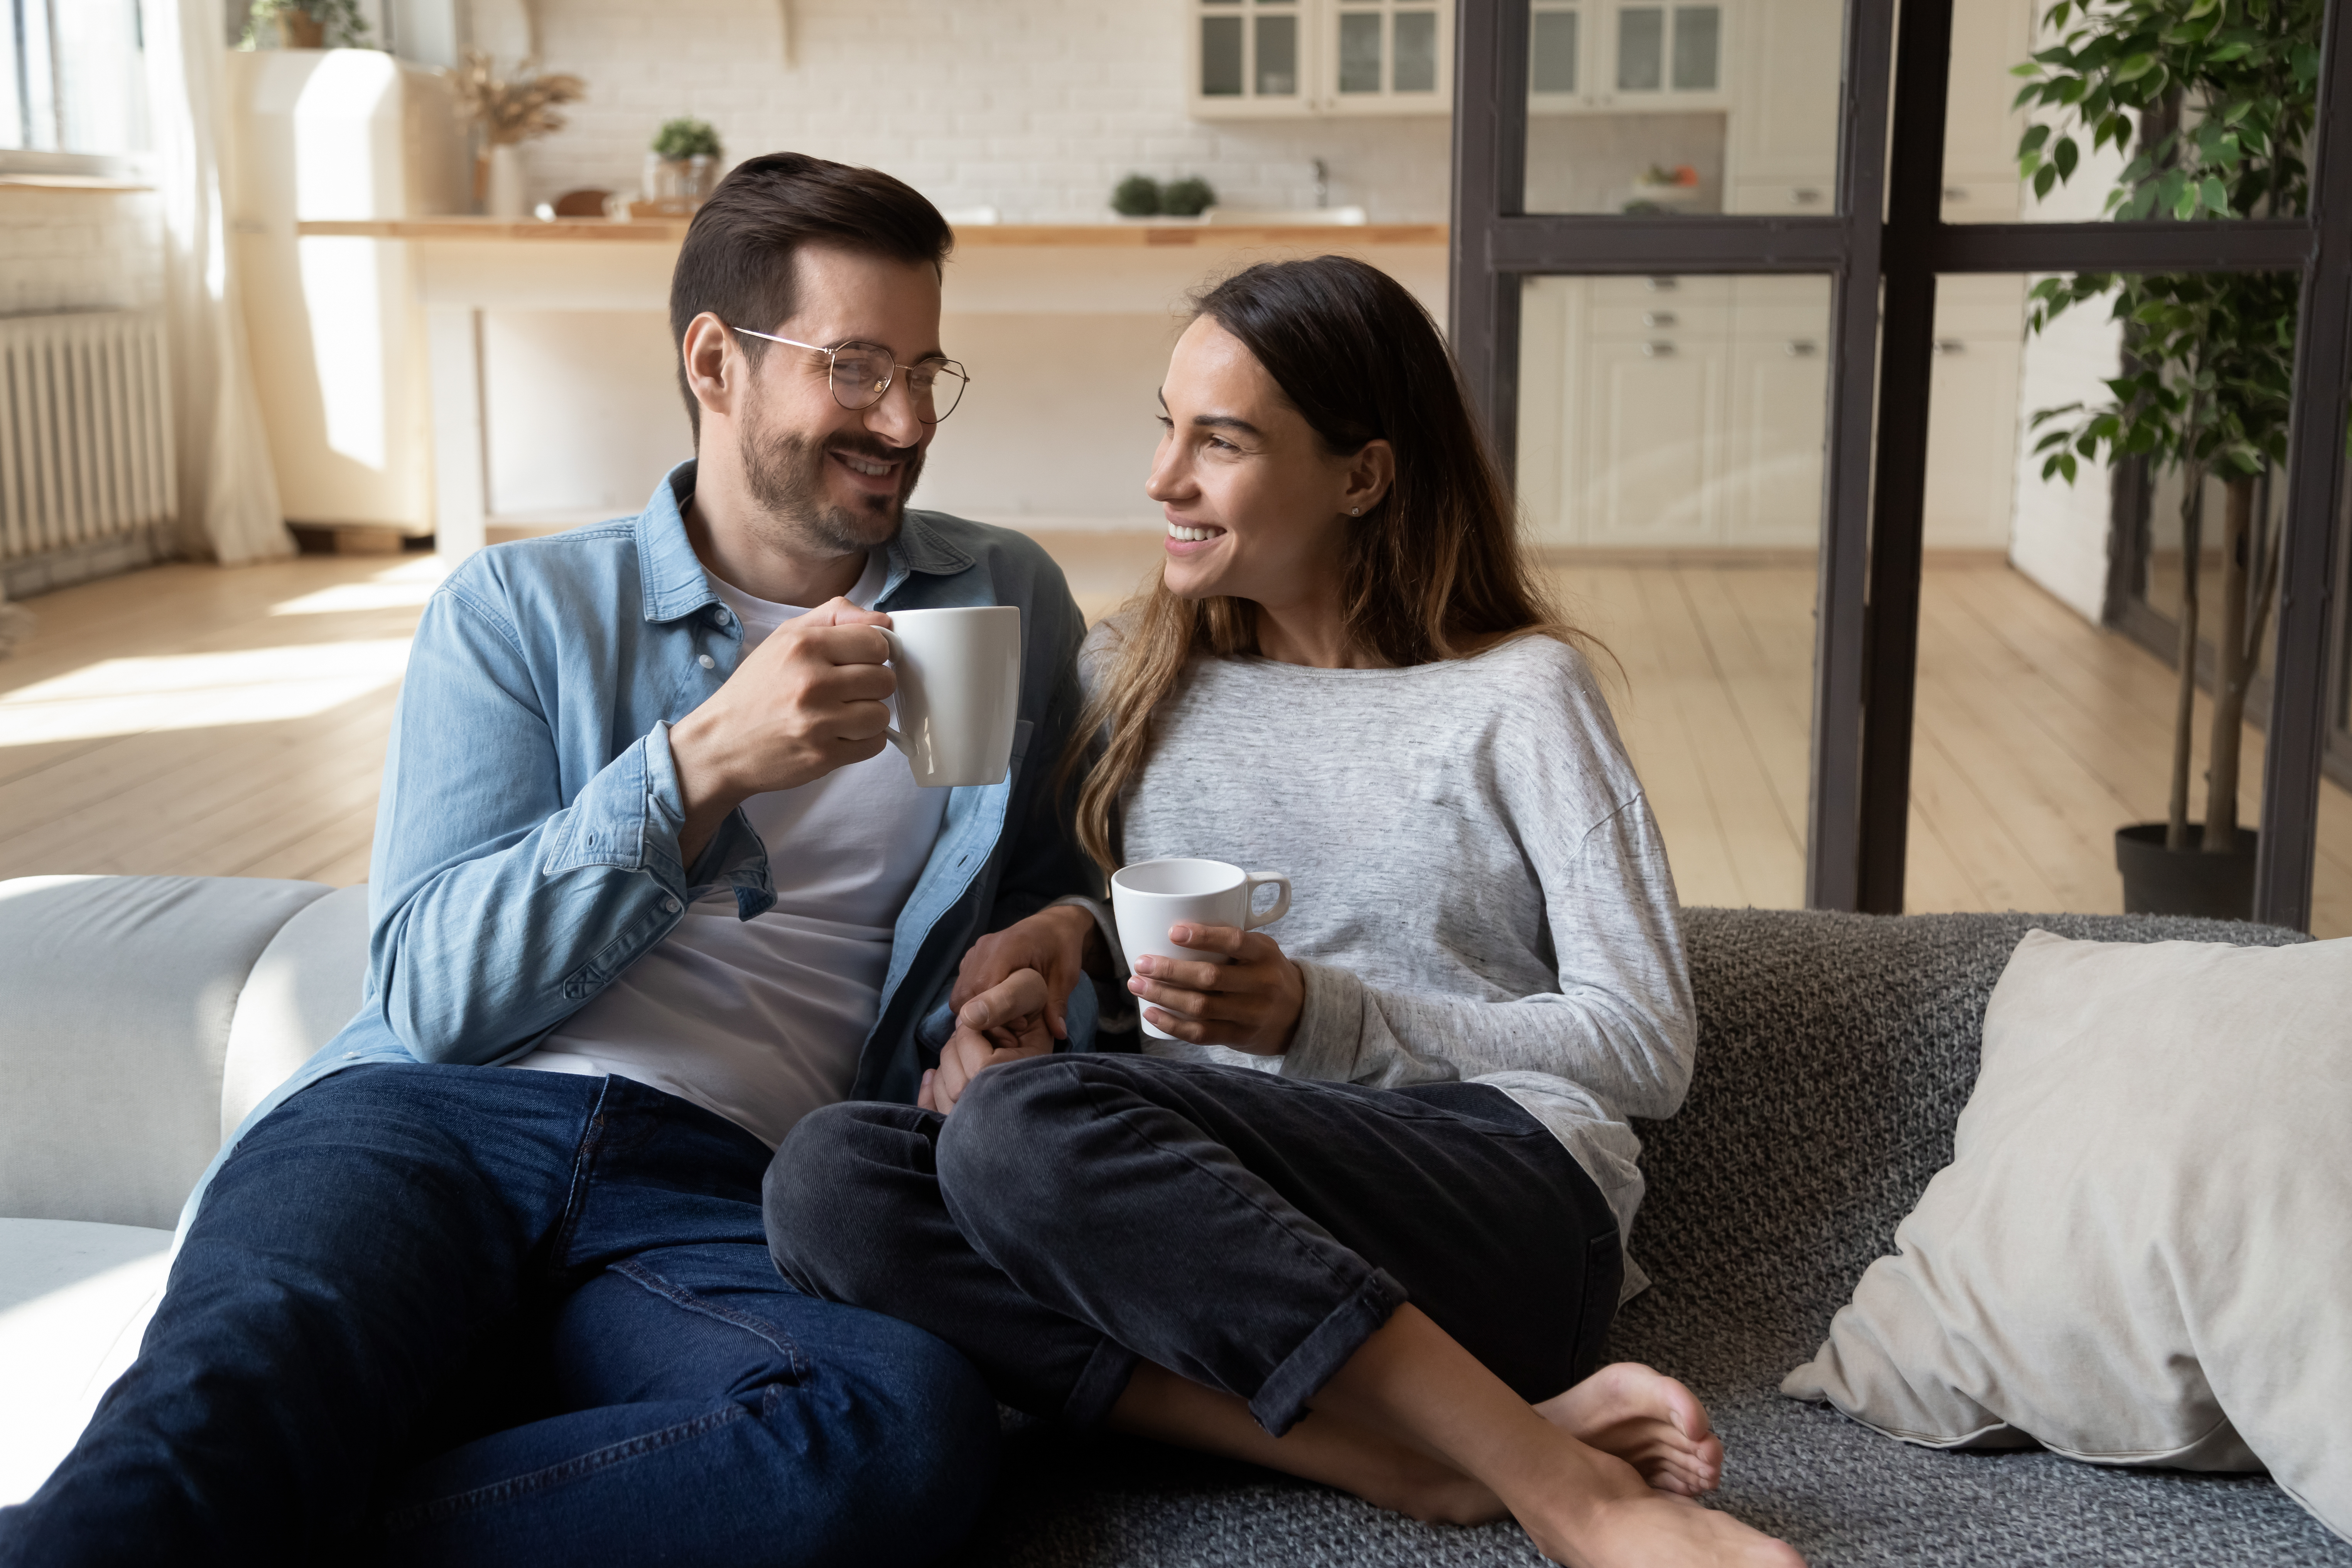 A couple enjoying coffee at home | Source: Shutterstock